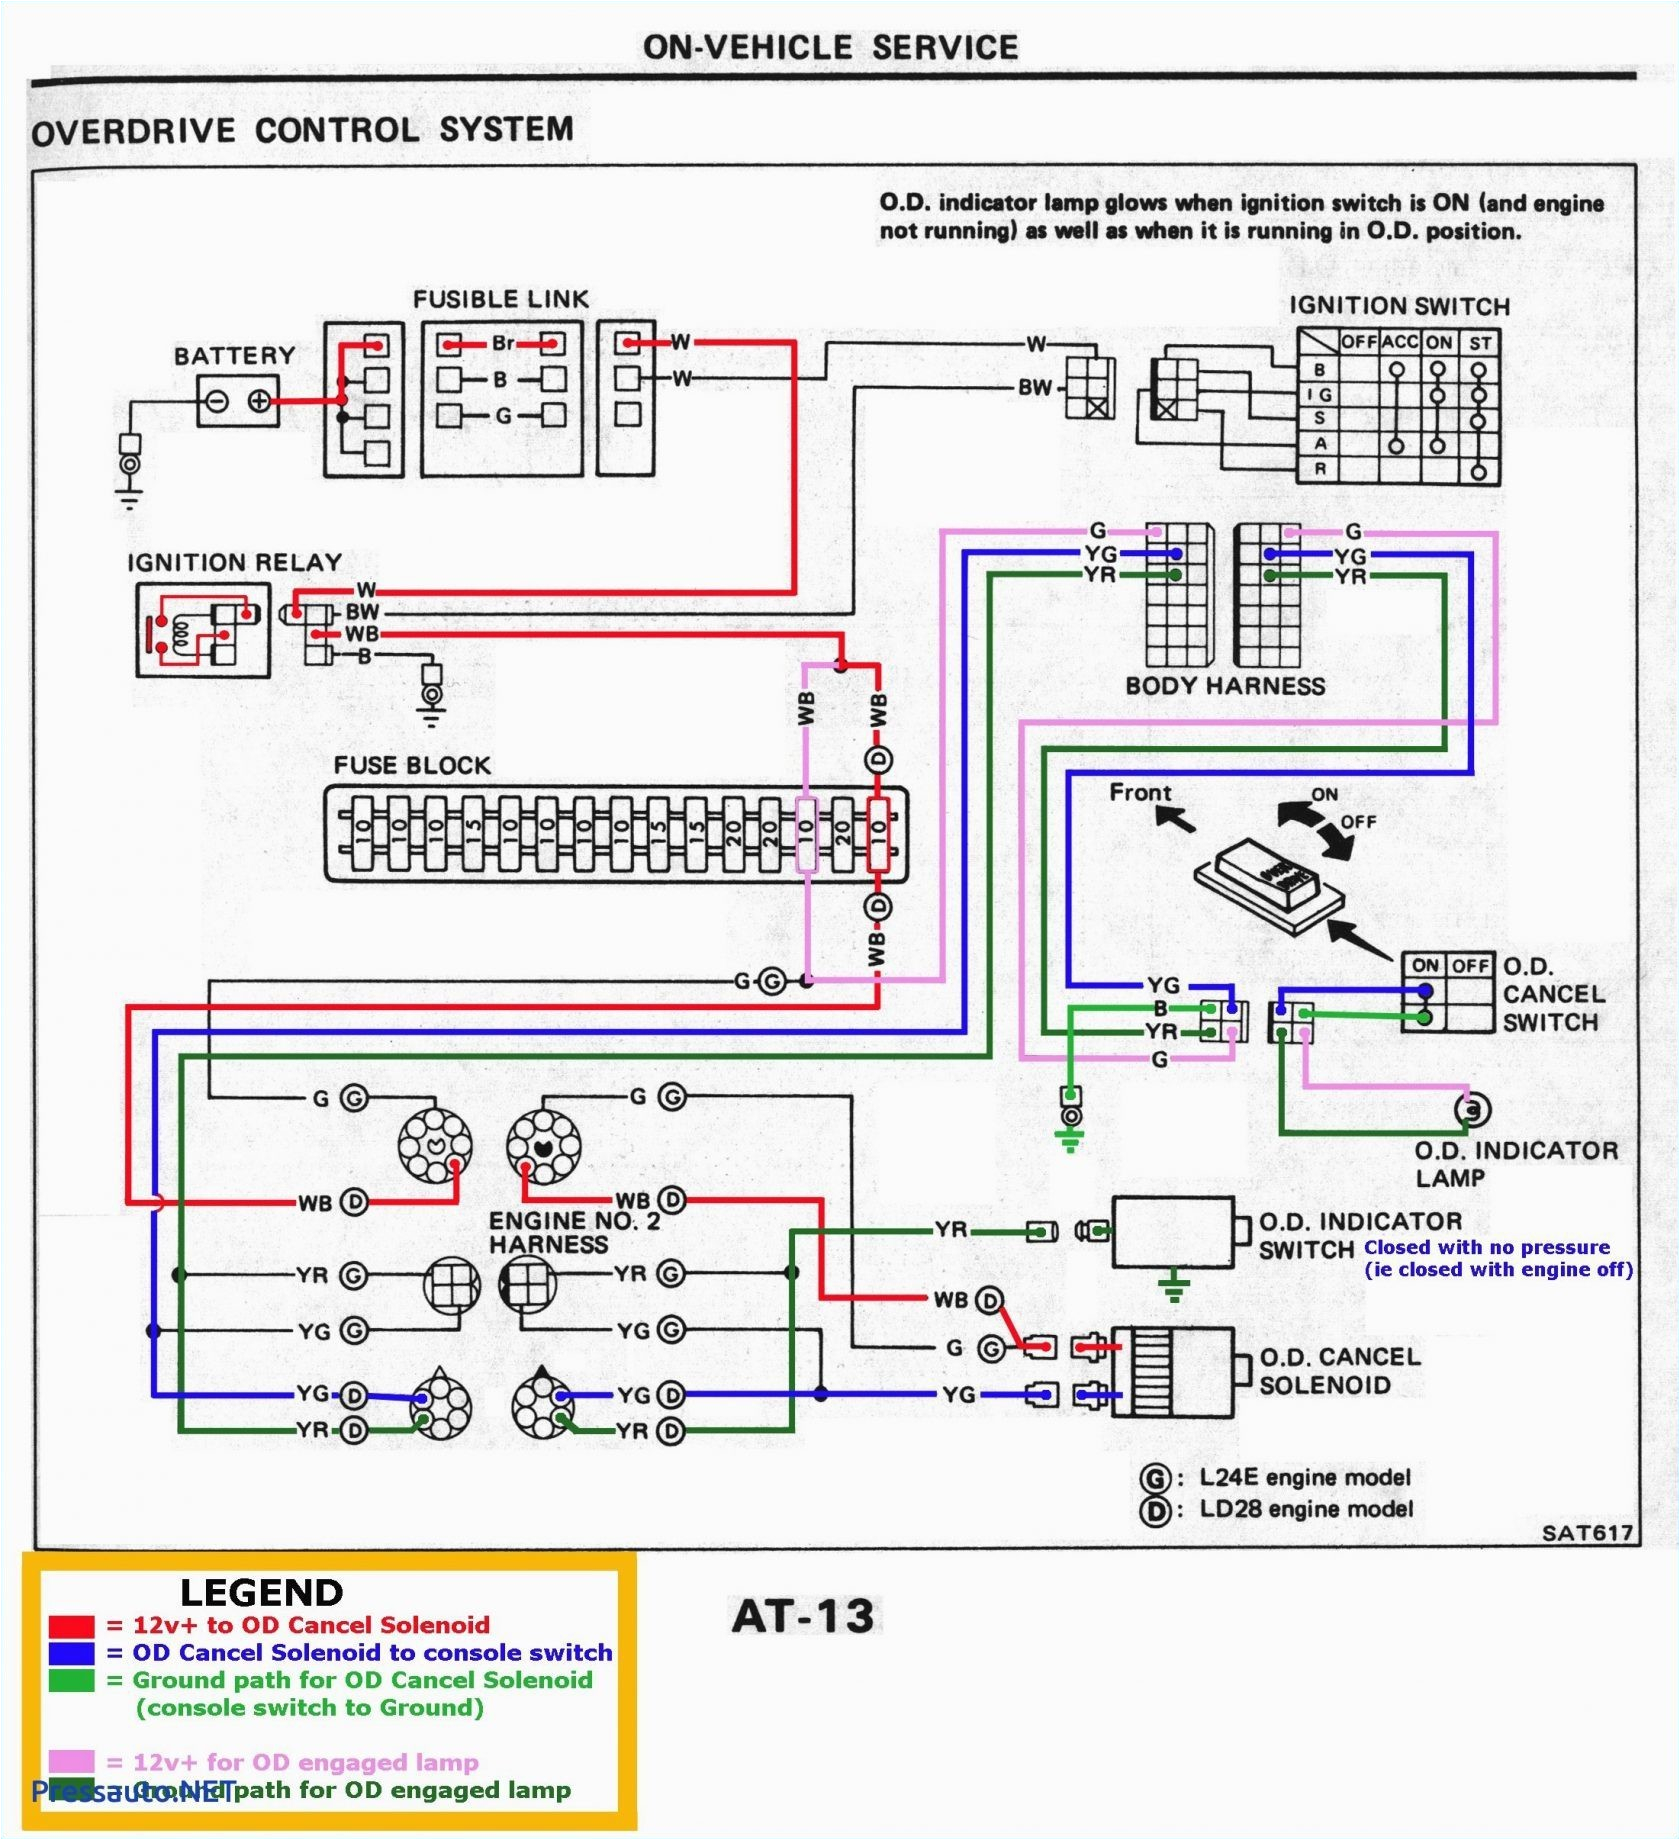 salzer toggle switches wiring diagram wiring diagram host diagram 3 pole square d 2510k02 wiring diagram